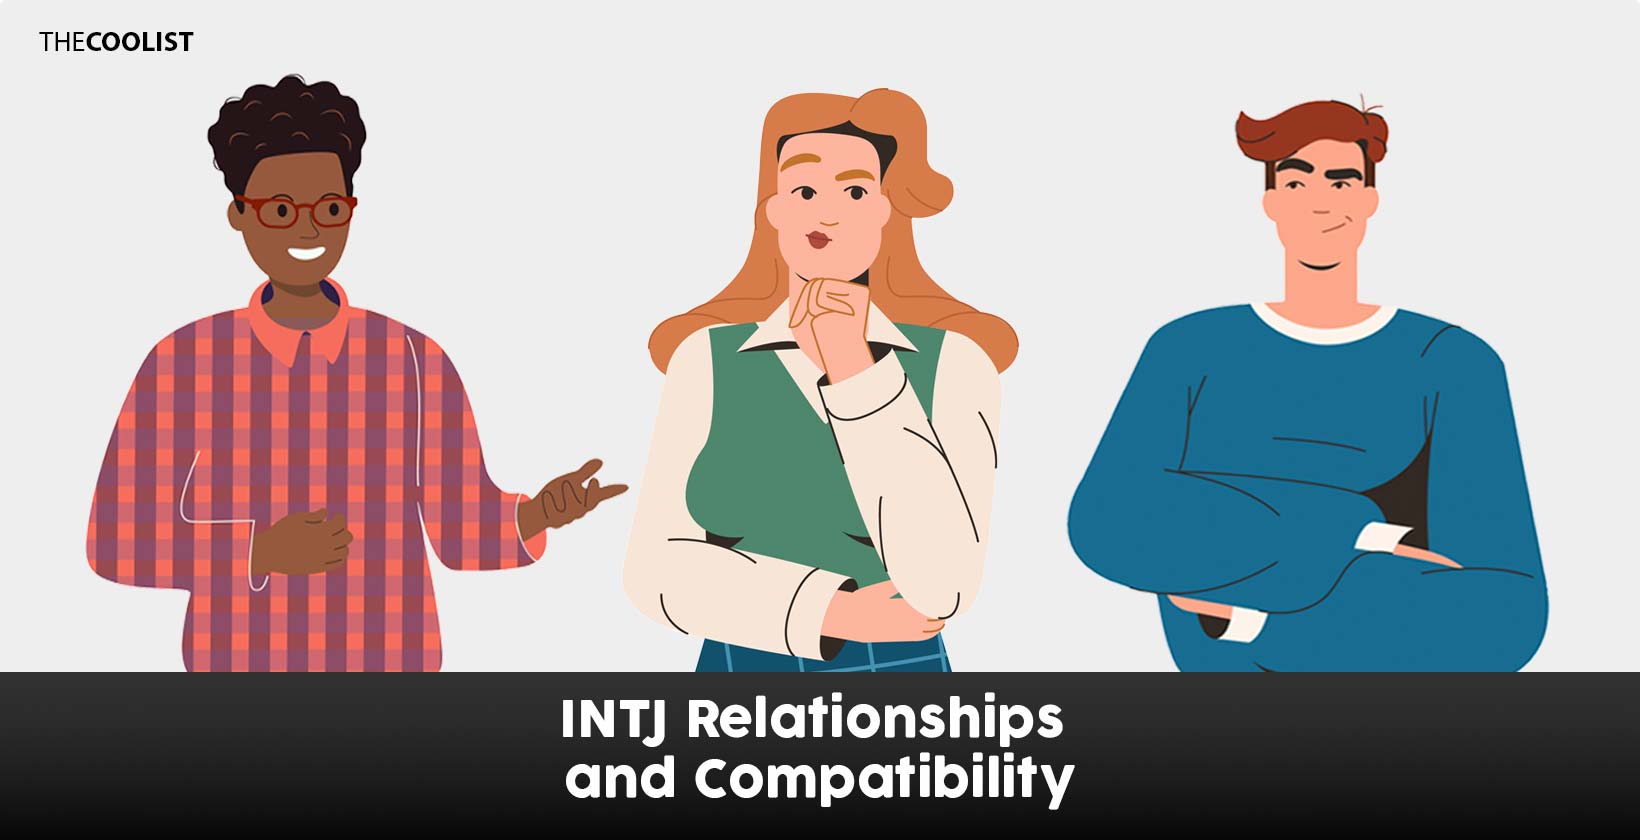 INTJ Relationships and Compatibility